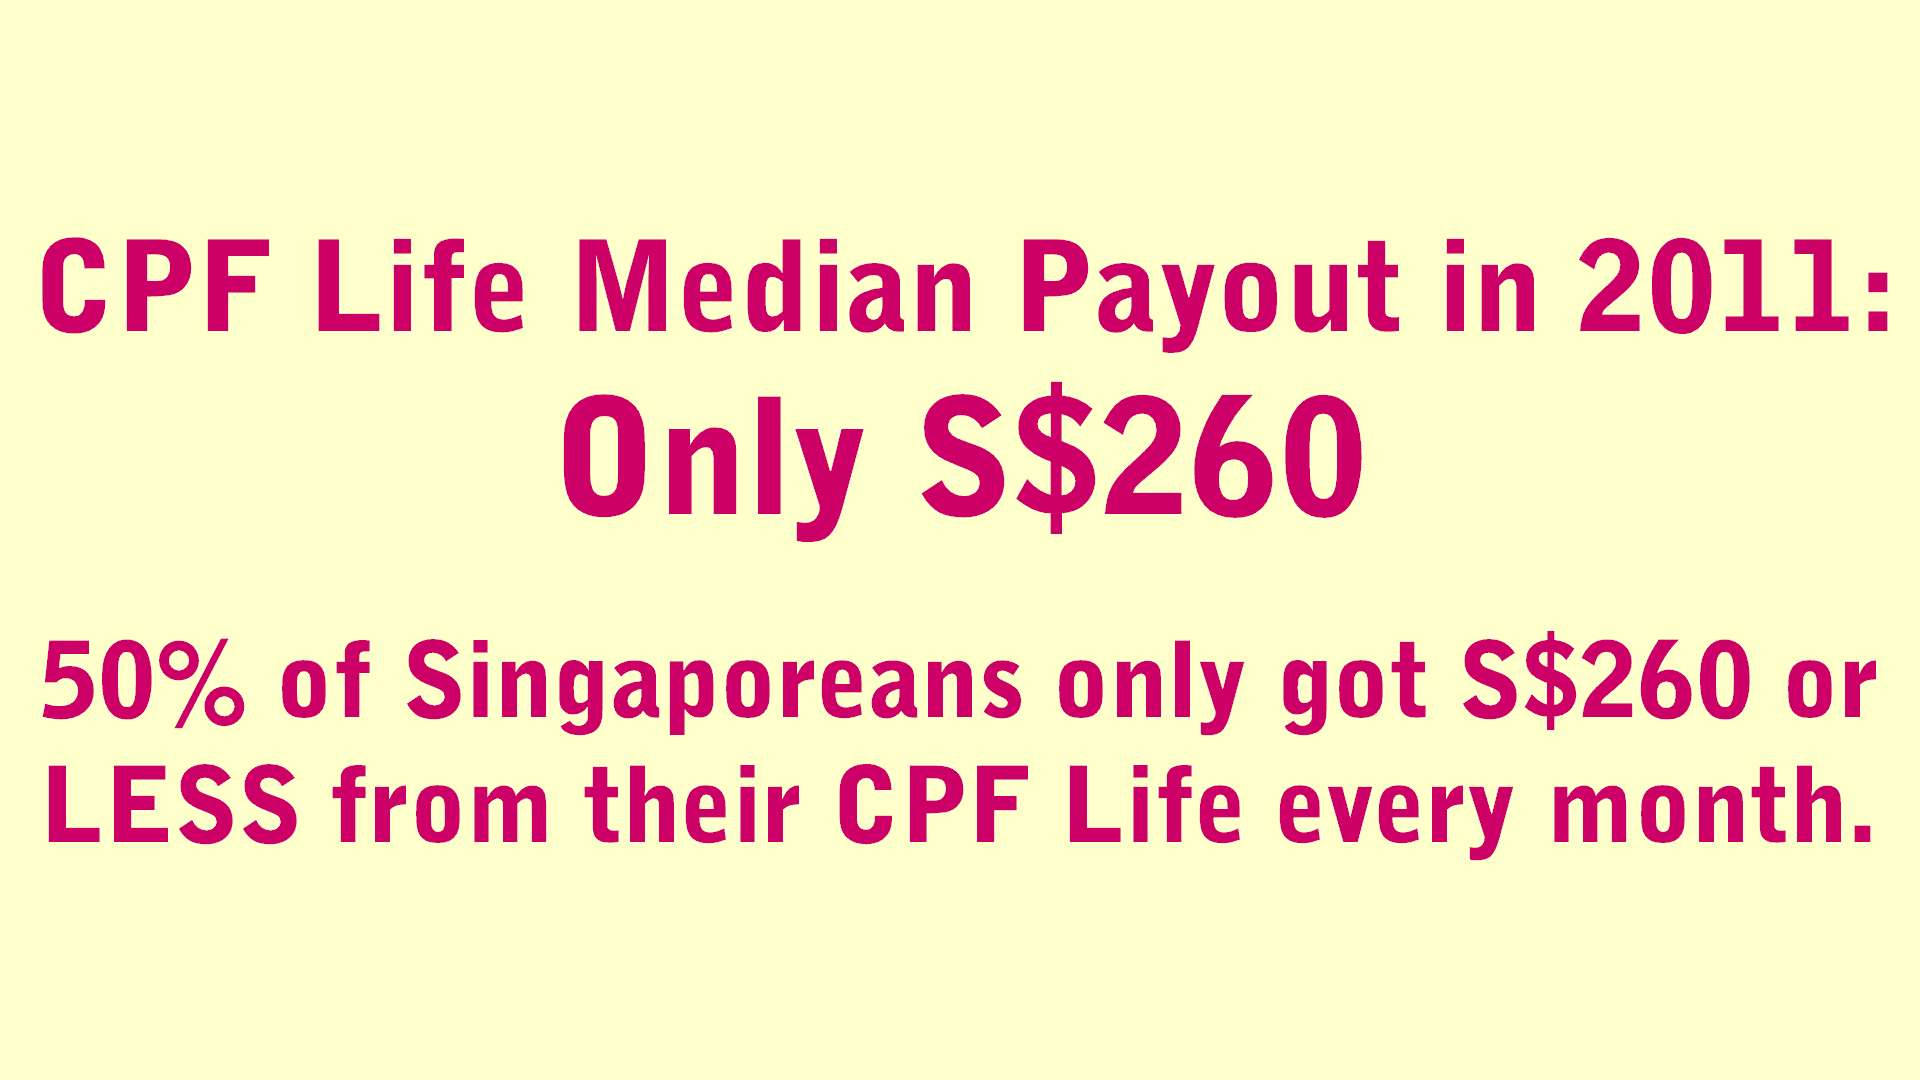 CPF Life Median Payout in 2011 Only $260.png